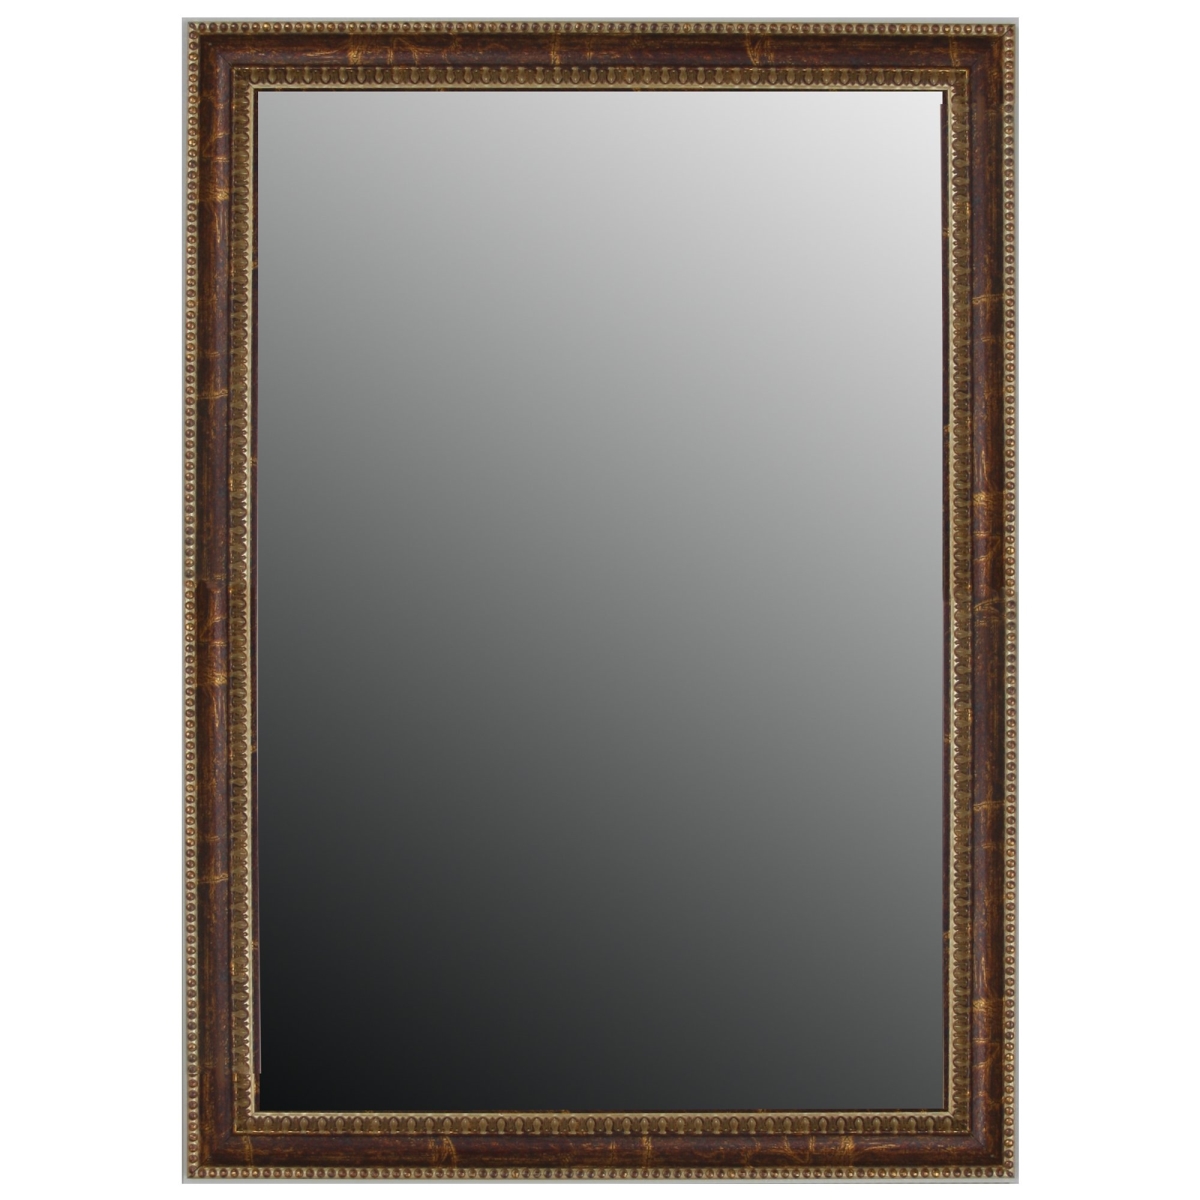 Hitchcock Butterfield 808800 Gold Georgian V Beaded Wall Mirror - 25.25 X 35.25 In.